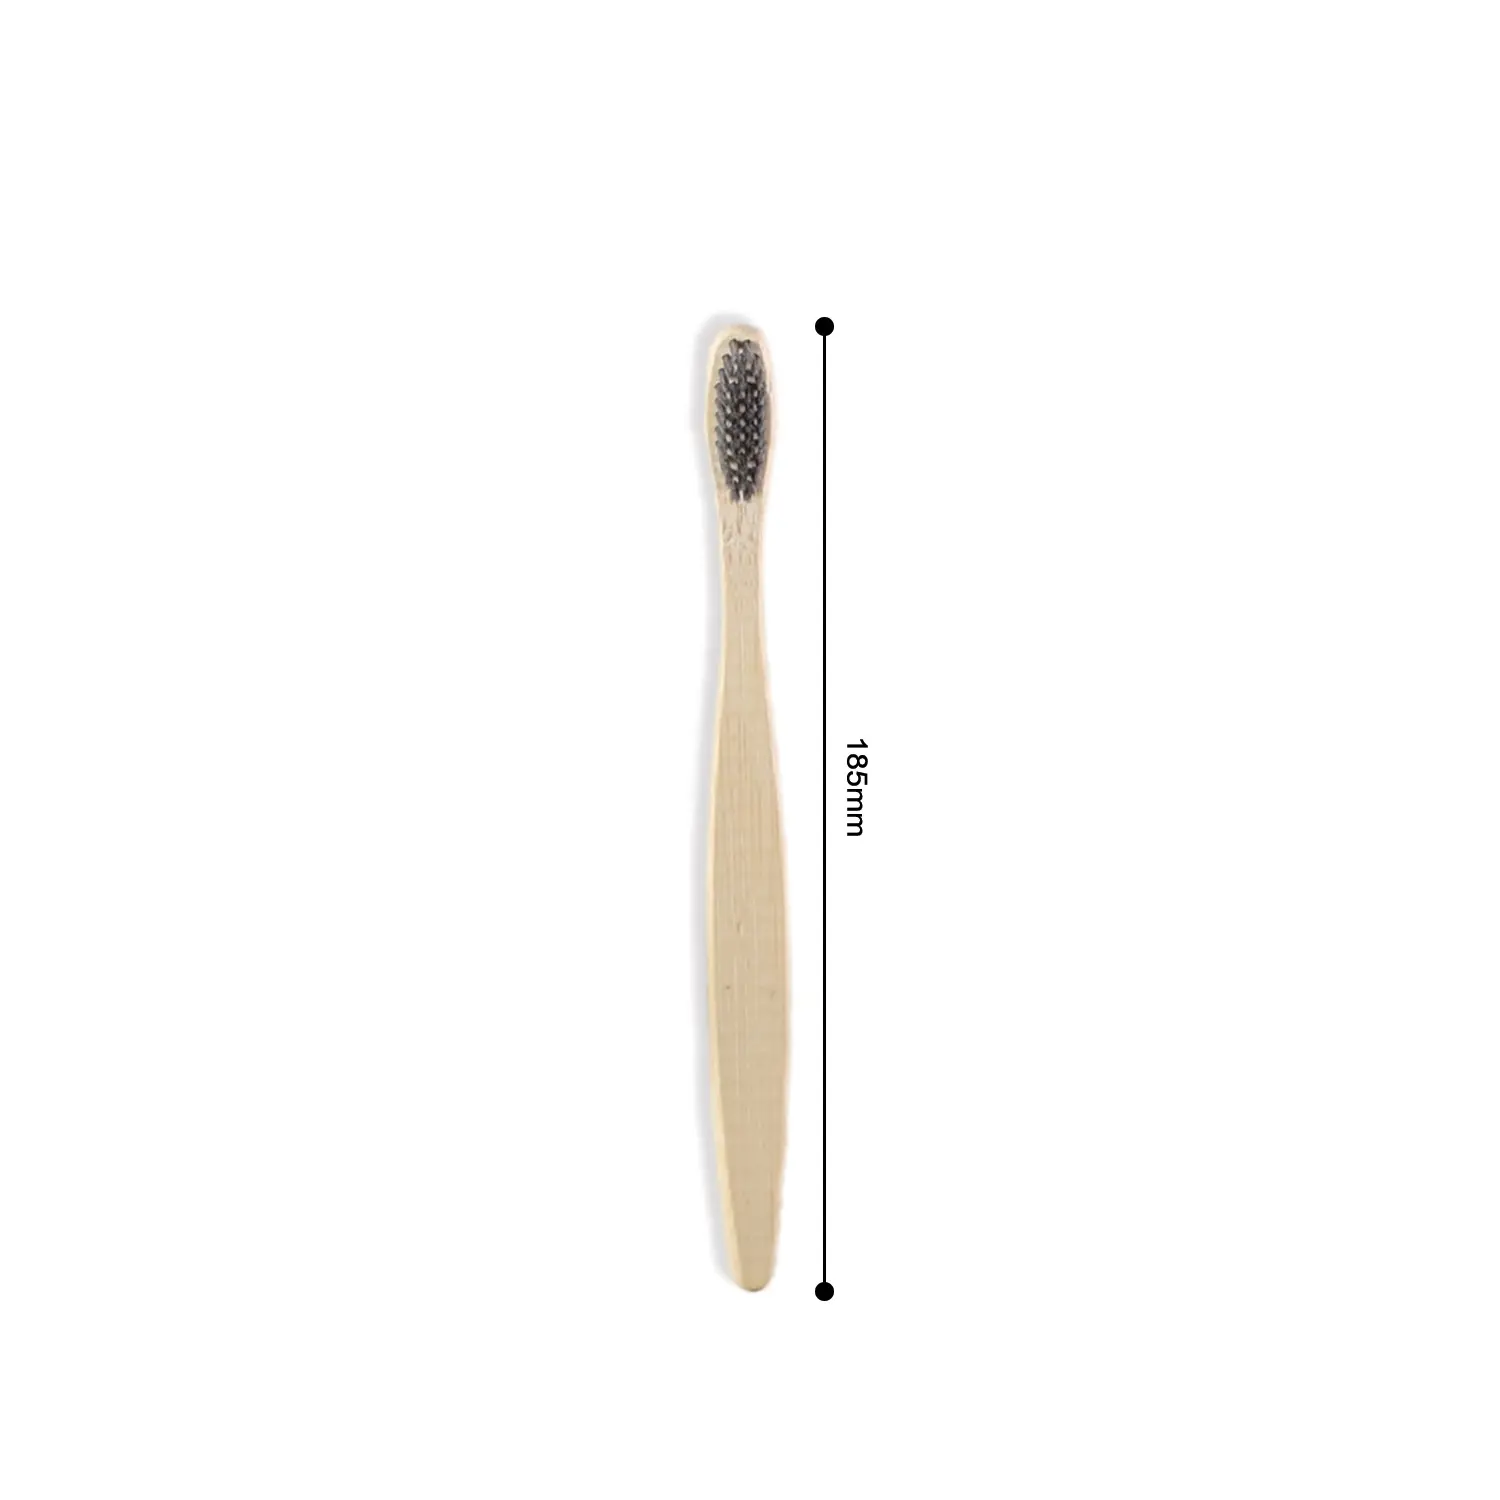 Standard Quality Personal Care Brush | Bamboo Toothbrush for Dental Cleaning from Indian Supplier of Toothbrush